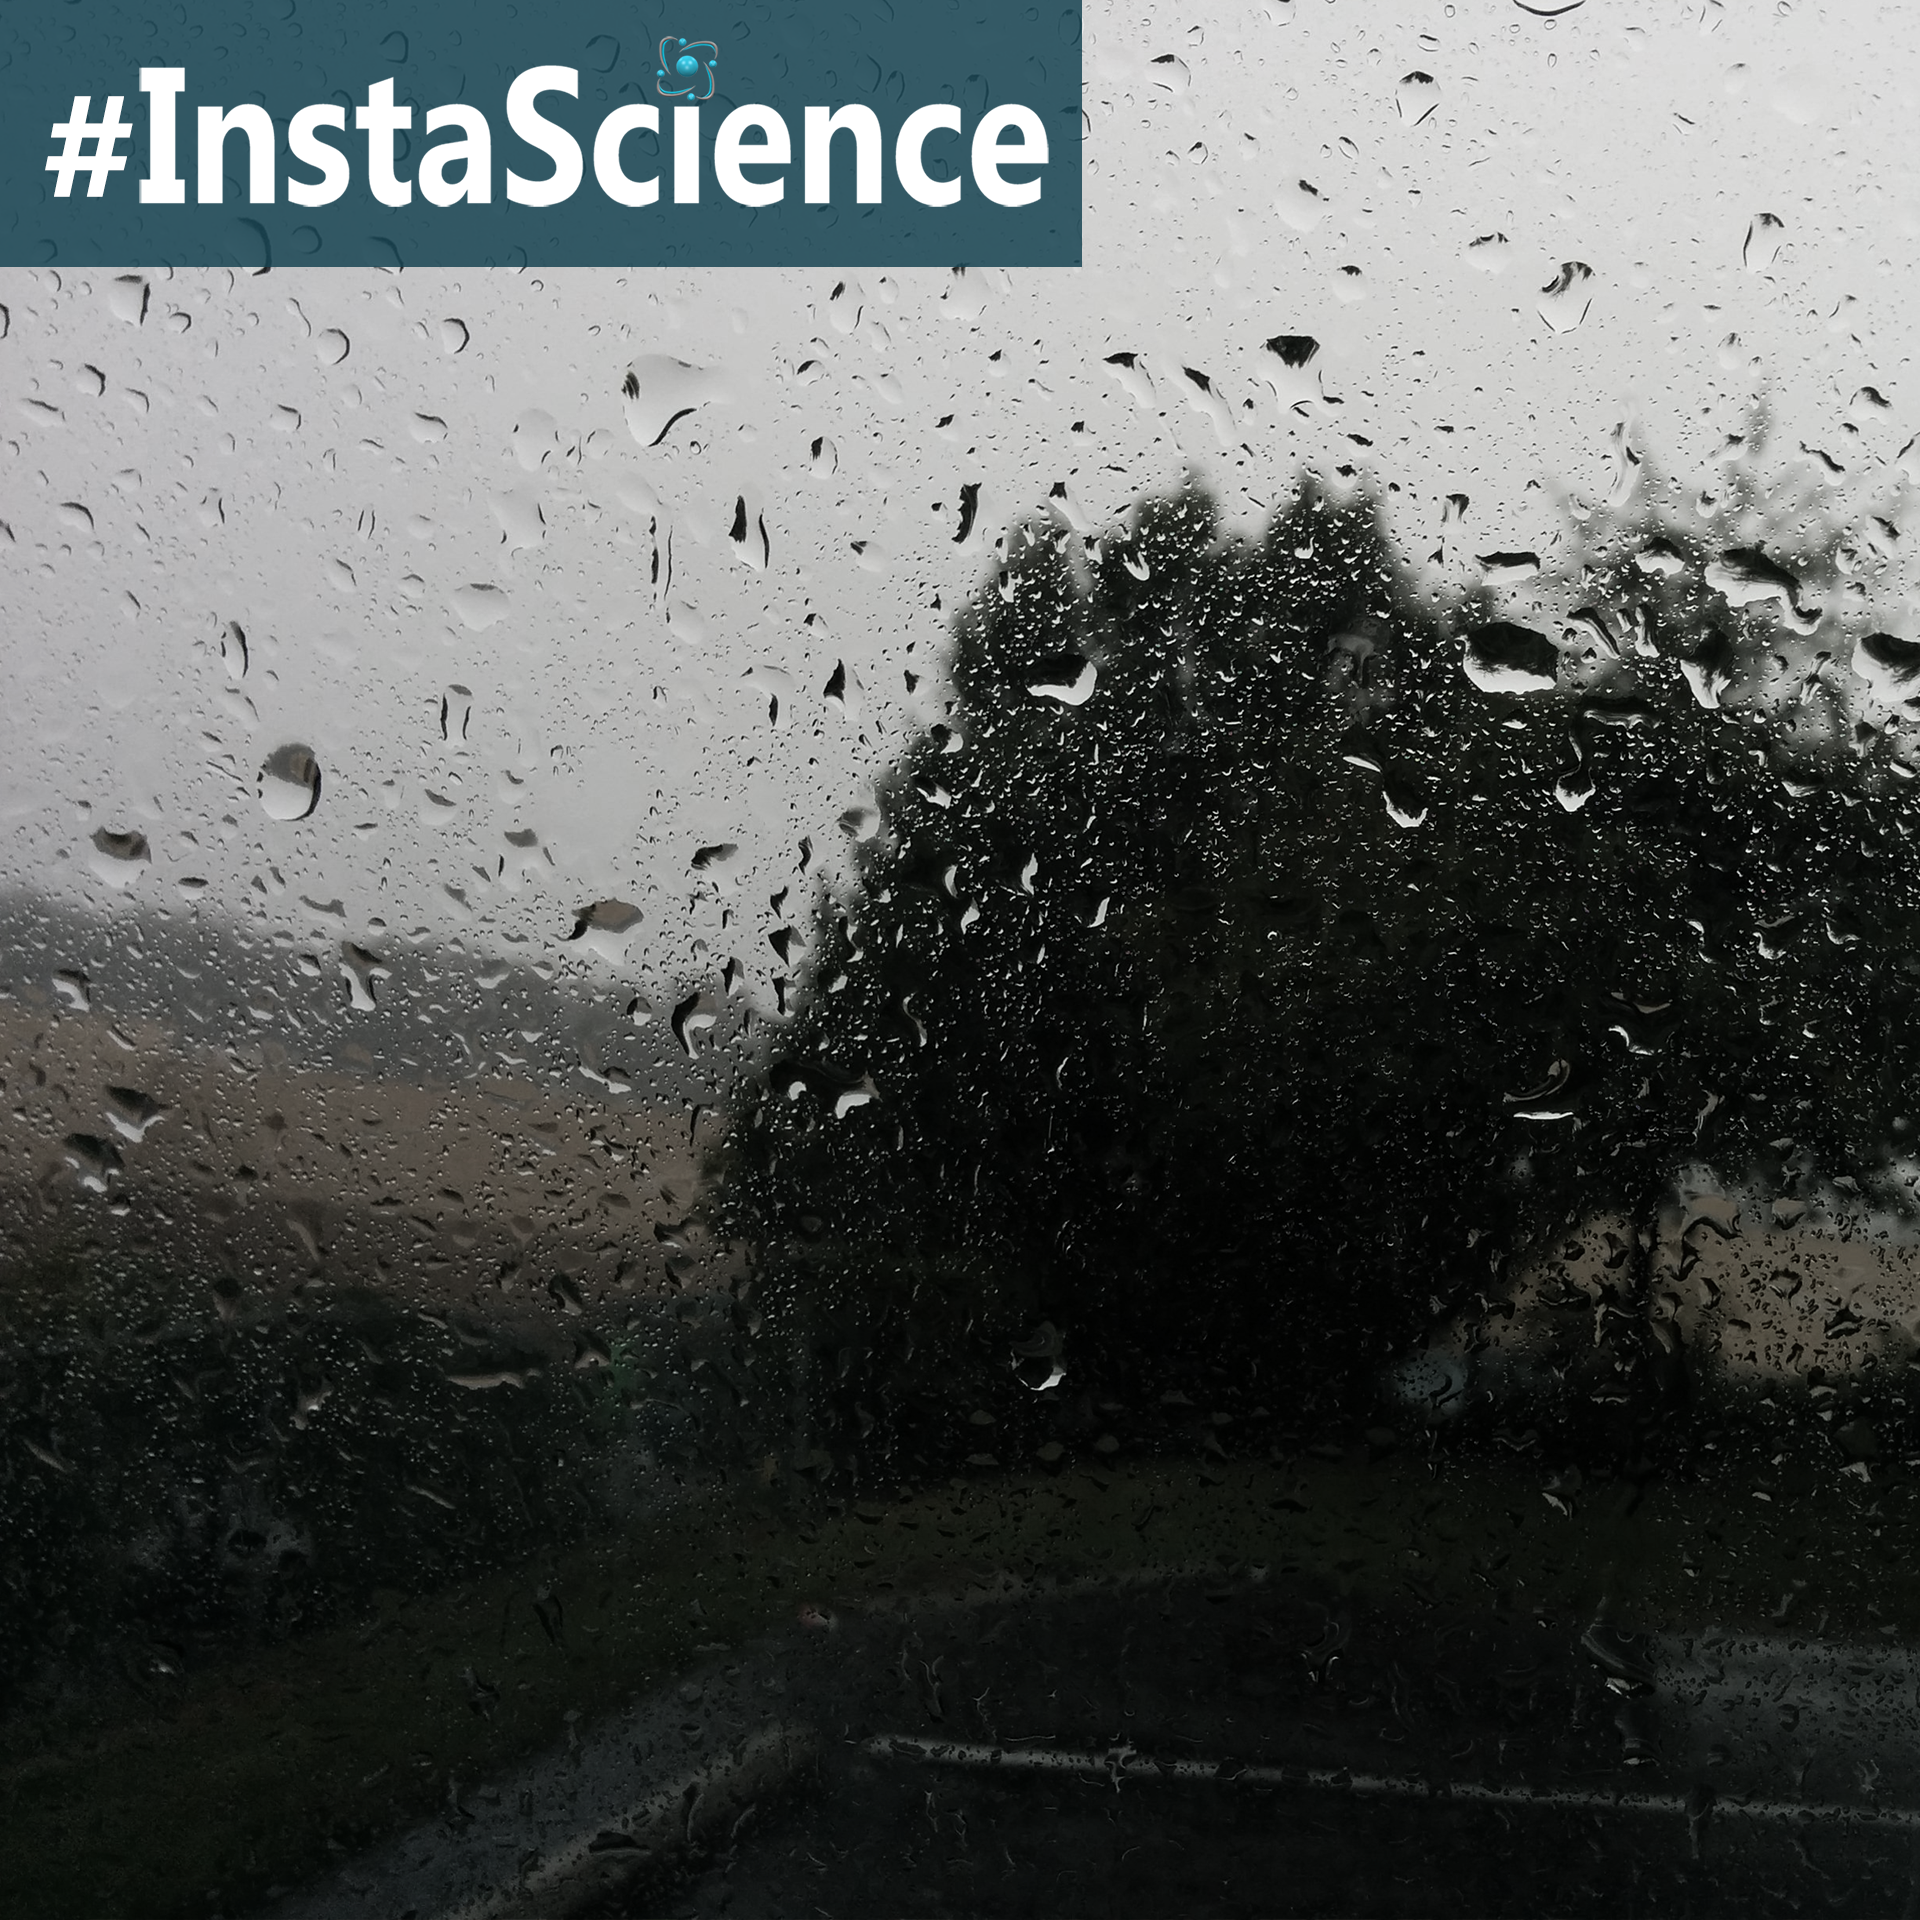 Learn about rain in an instant with these facts and activities!